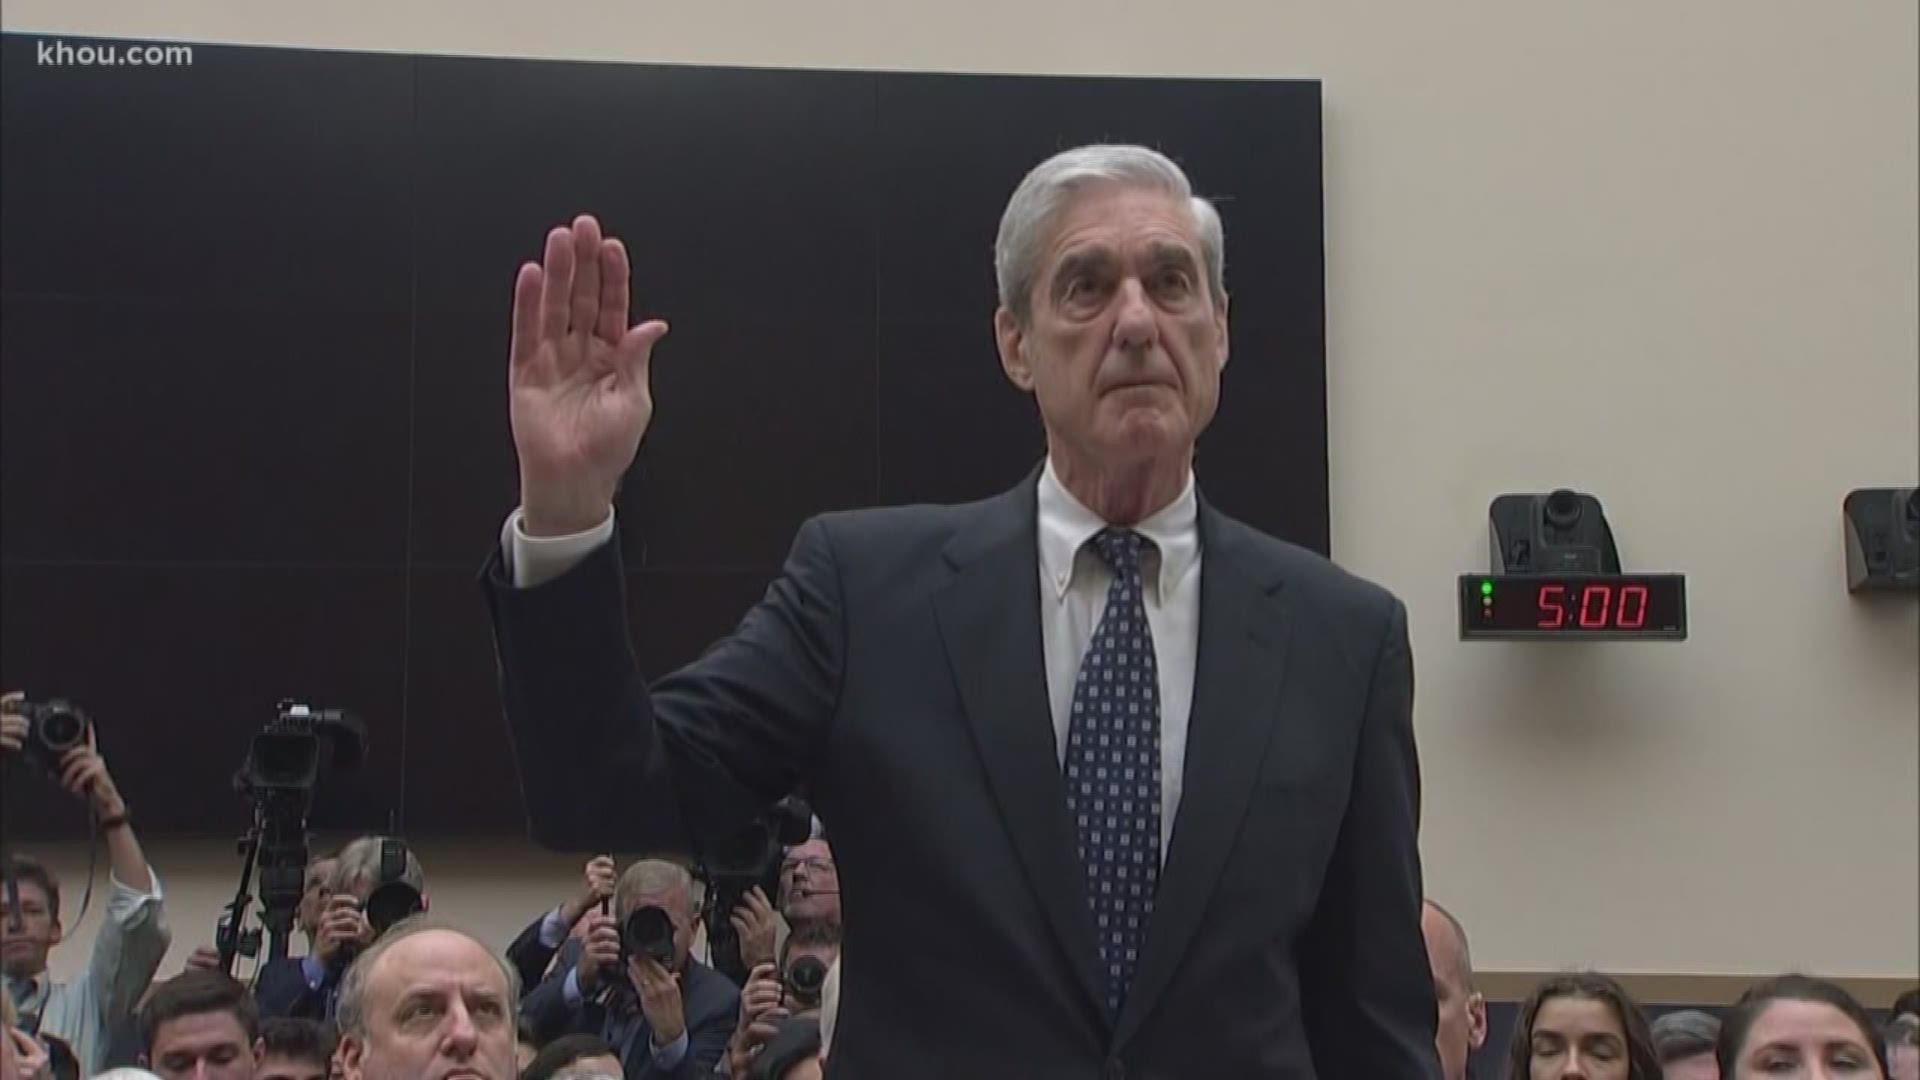 Former Special Counsel Robert Mueller testified for hours on Russian interference in the 2016 election and President Trump's alleged efforts to curtail the investigation.